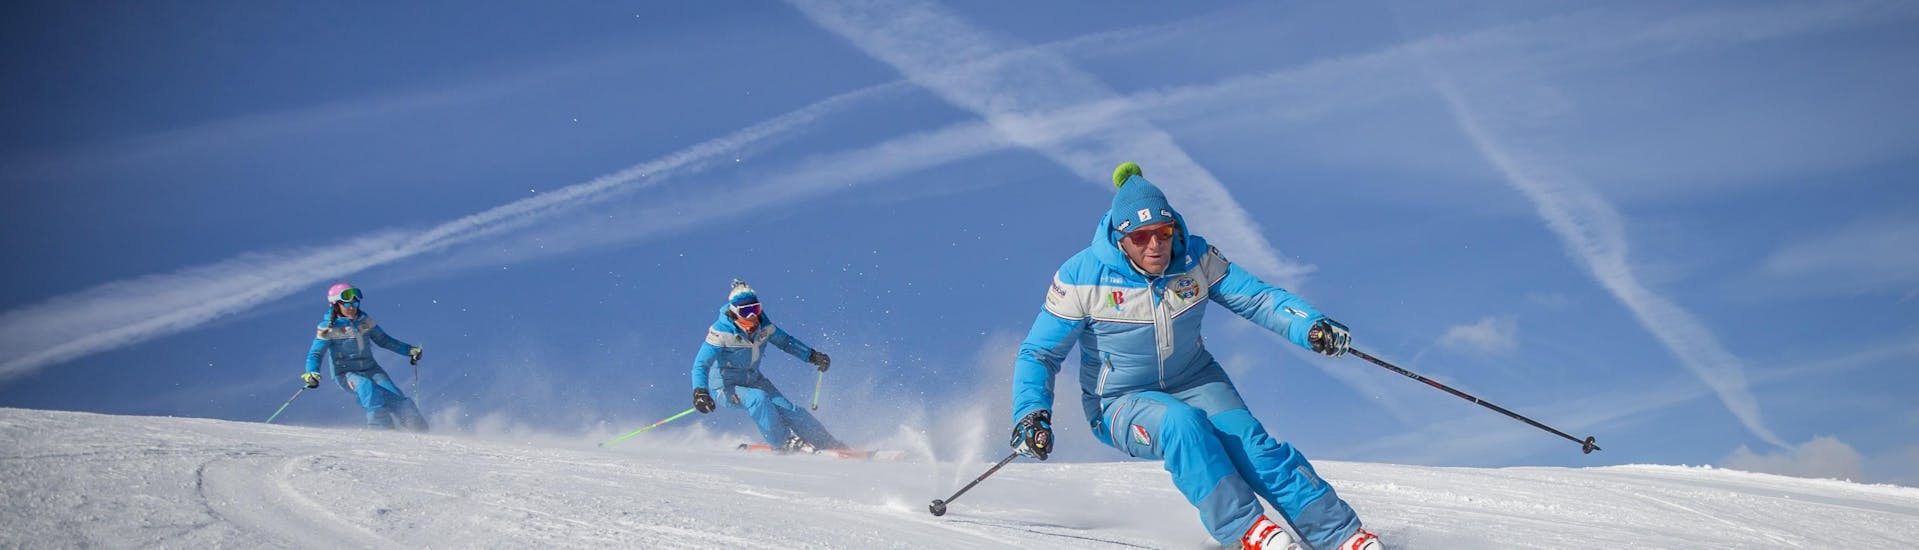 Ski instructors are training before one of the private ski lessons for adults of all levels in Sauze d'Oulx.